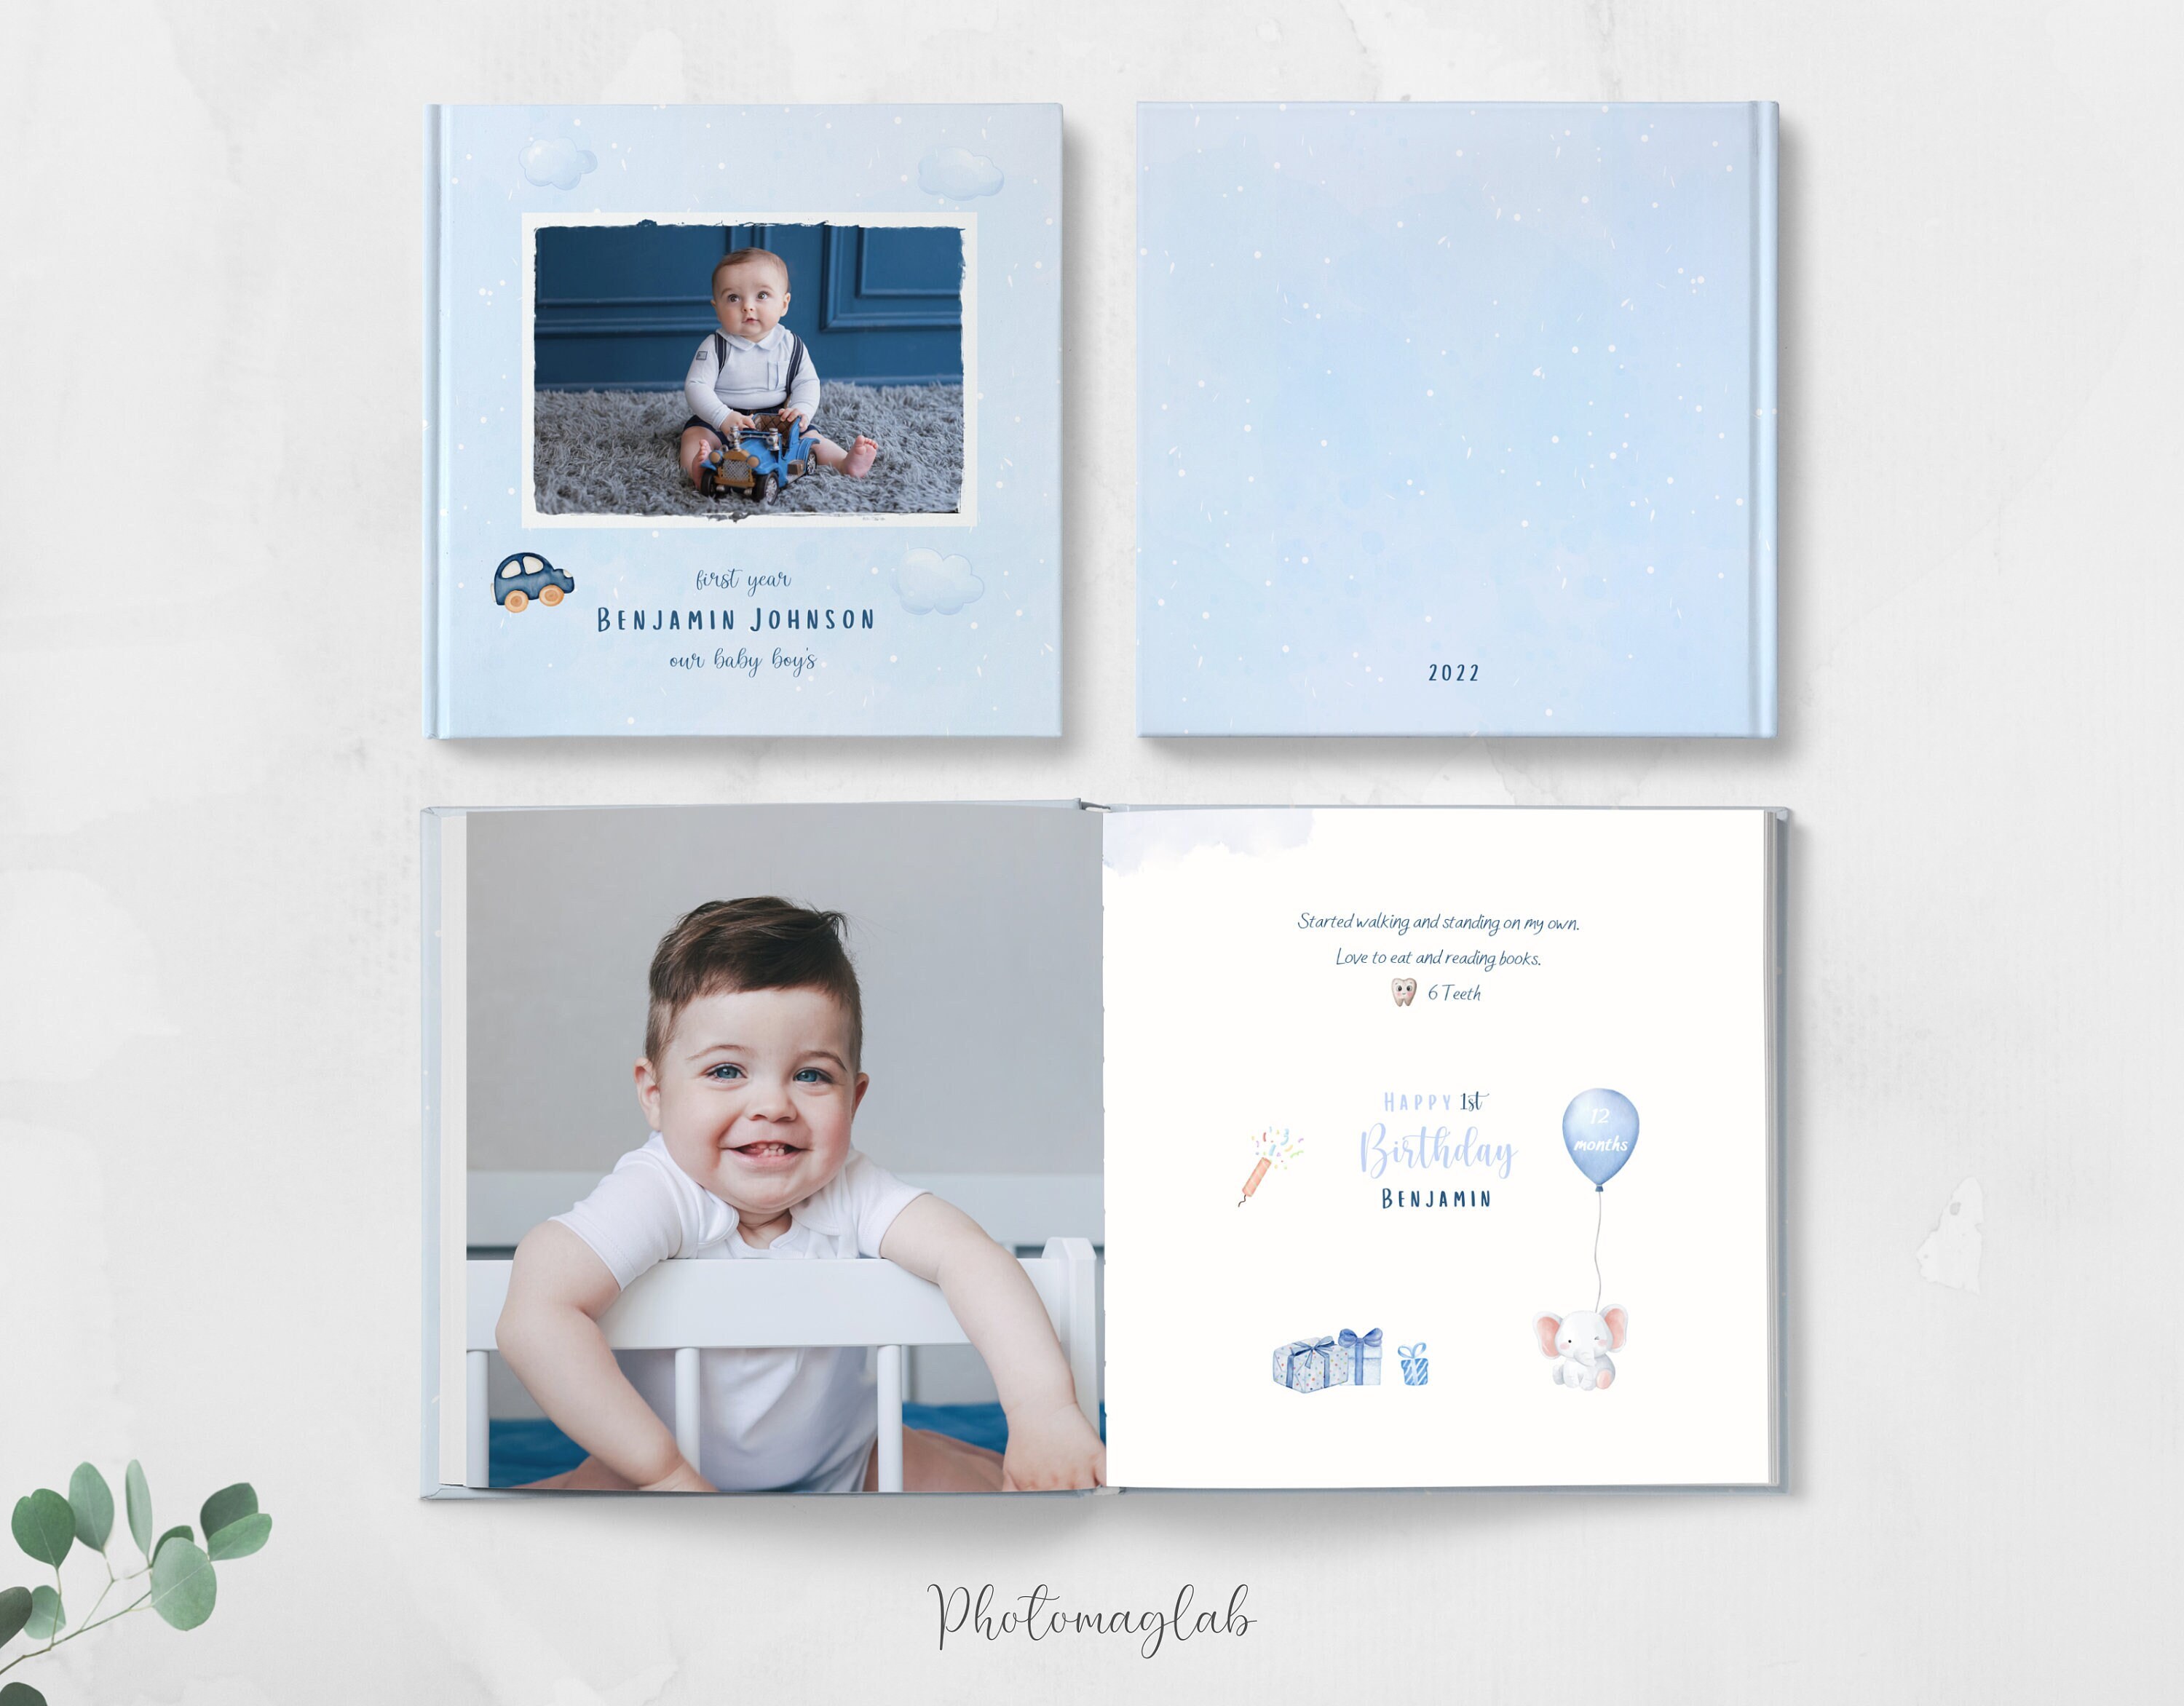 Baby's First Year Blocks Personalized Photo Album- Small